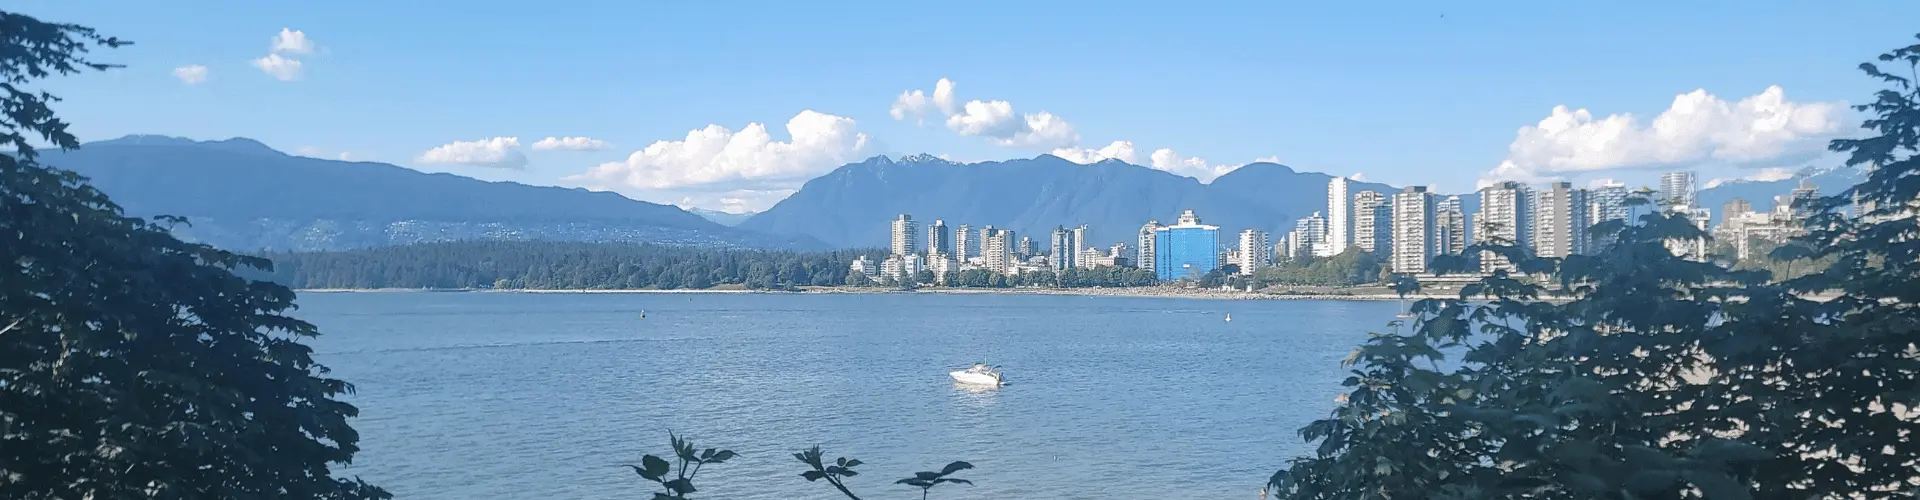 View of Vancouver across water with mountain background